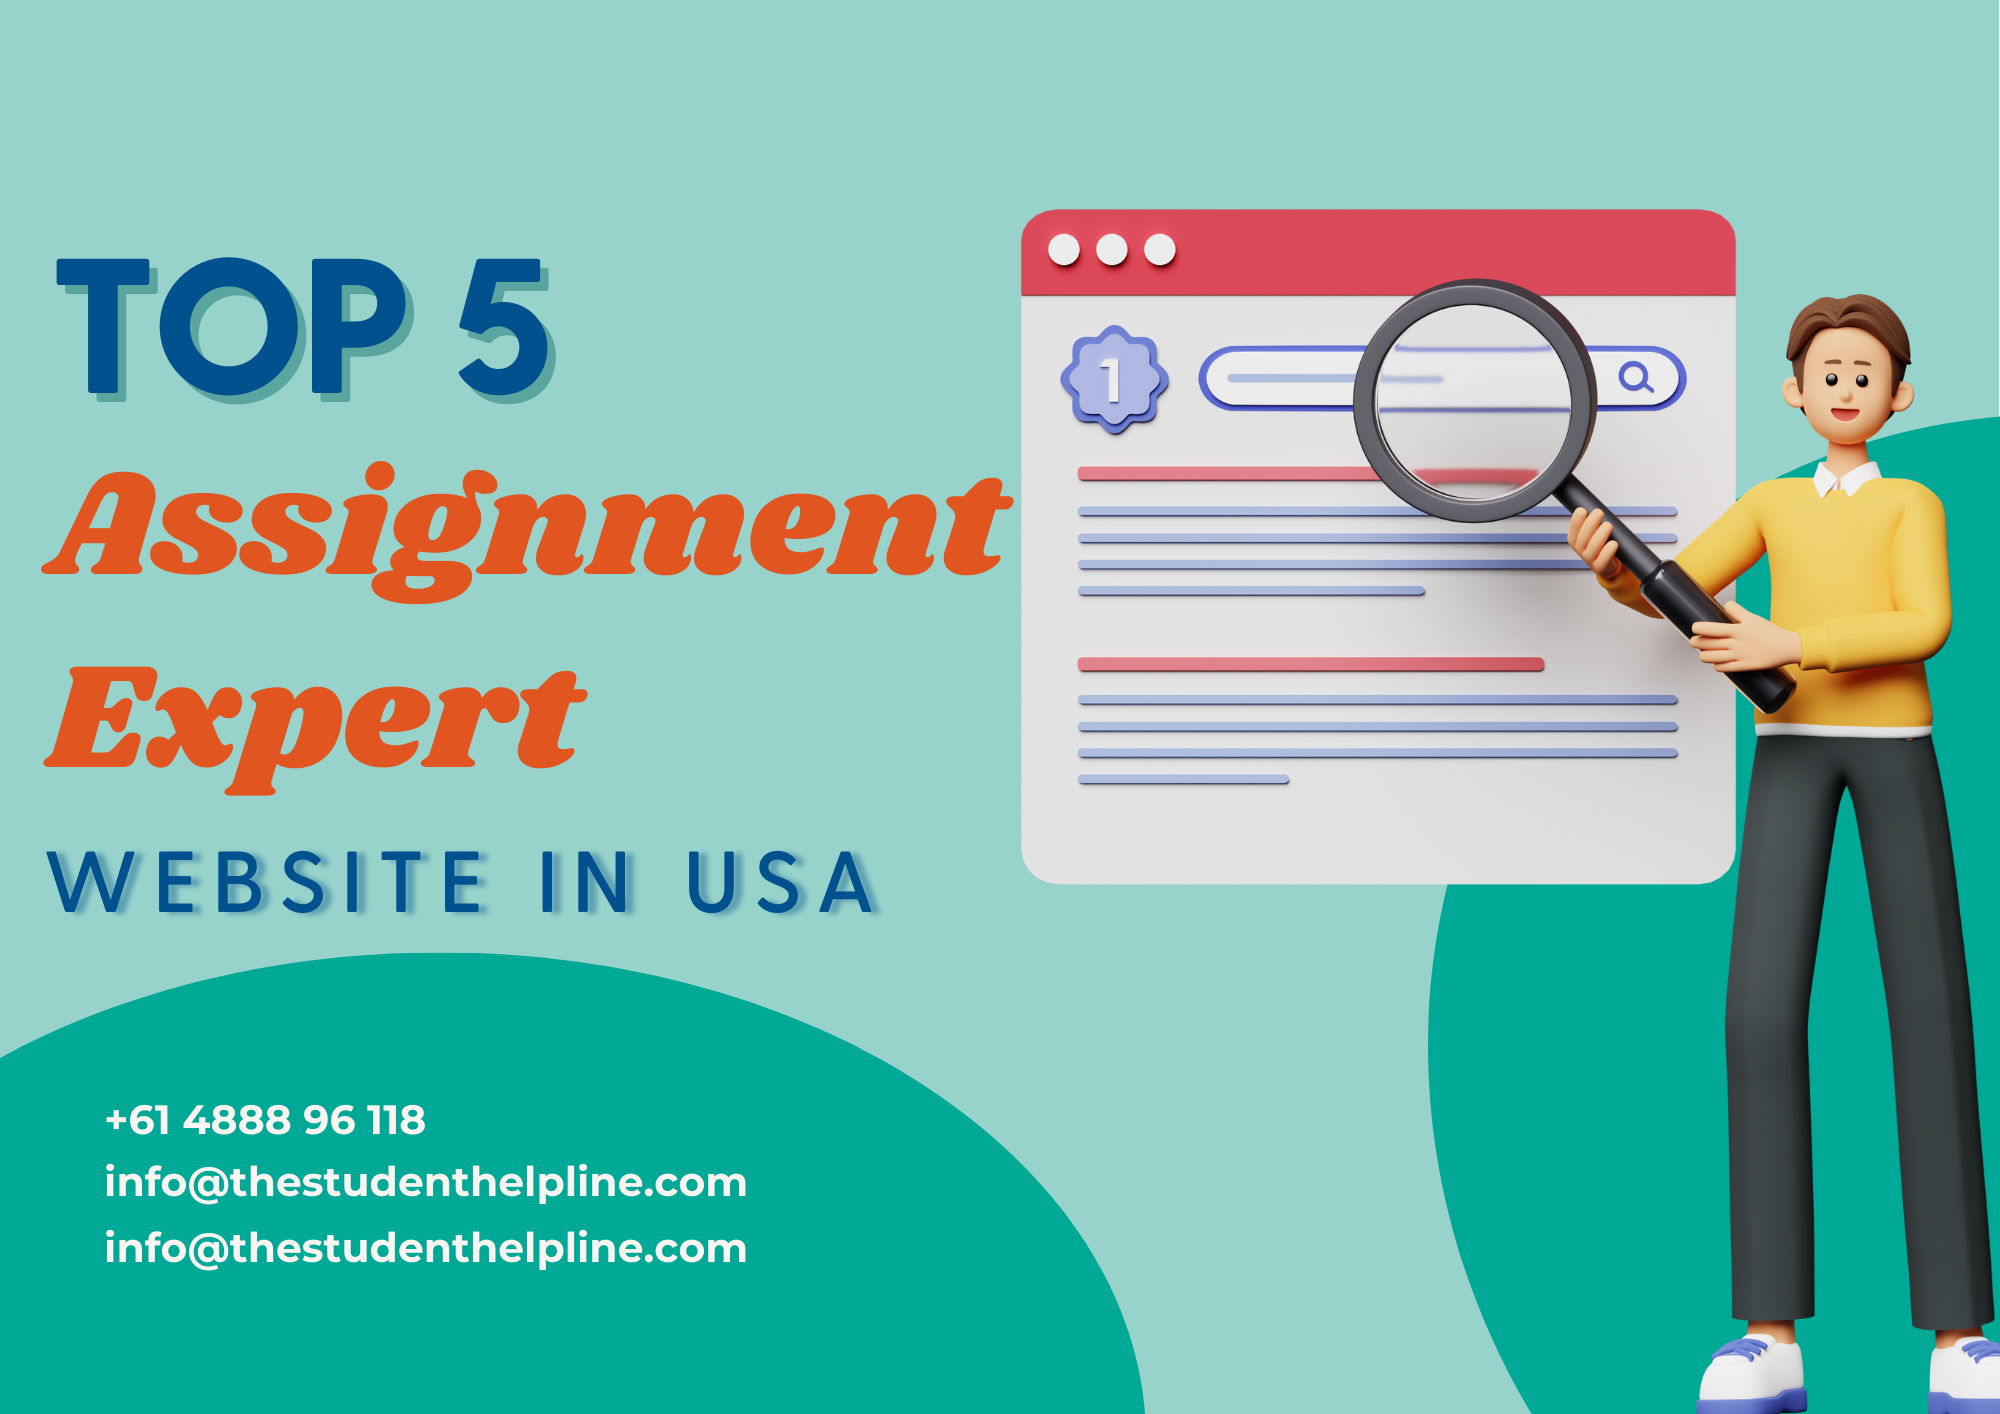 Top 3 Assignment Expert Websites in the USA